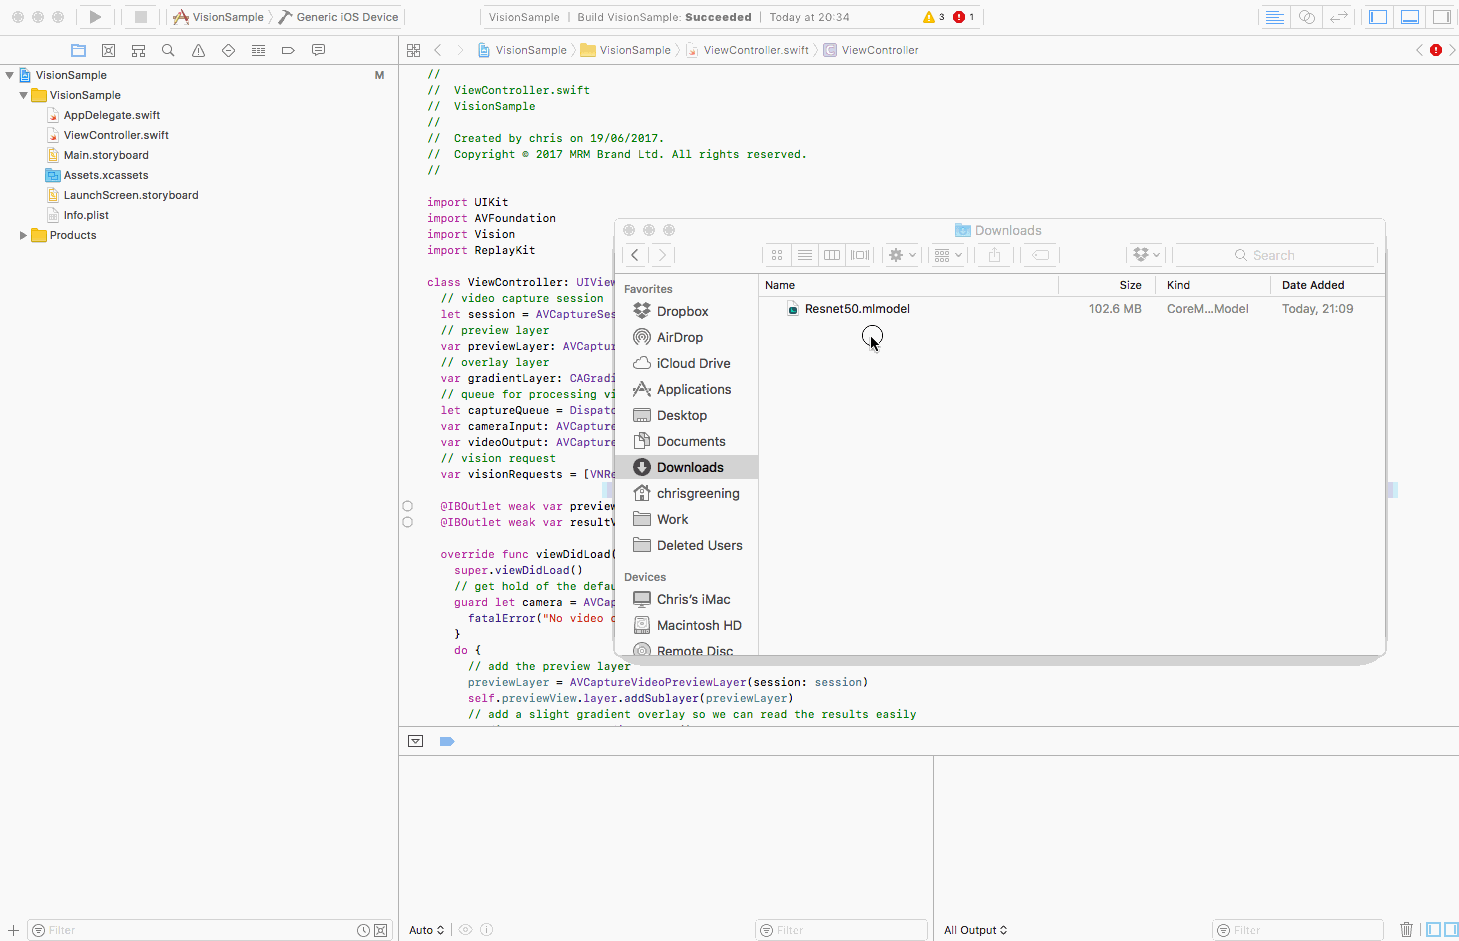 Gif to show dragging and dropping of model into XCode